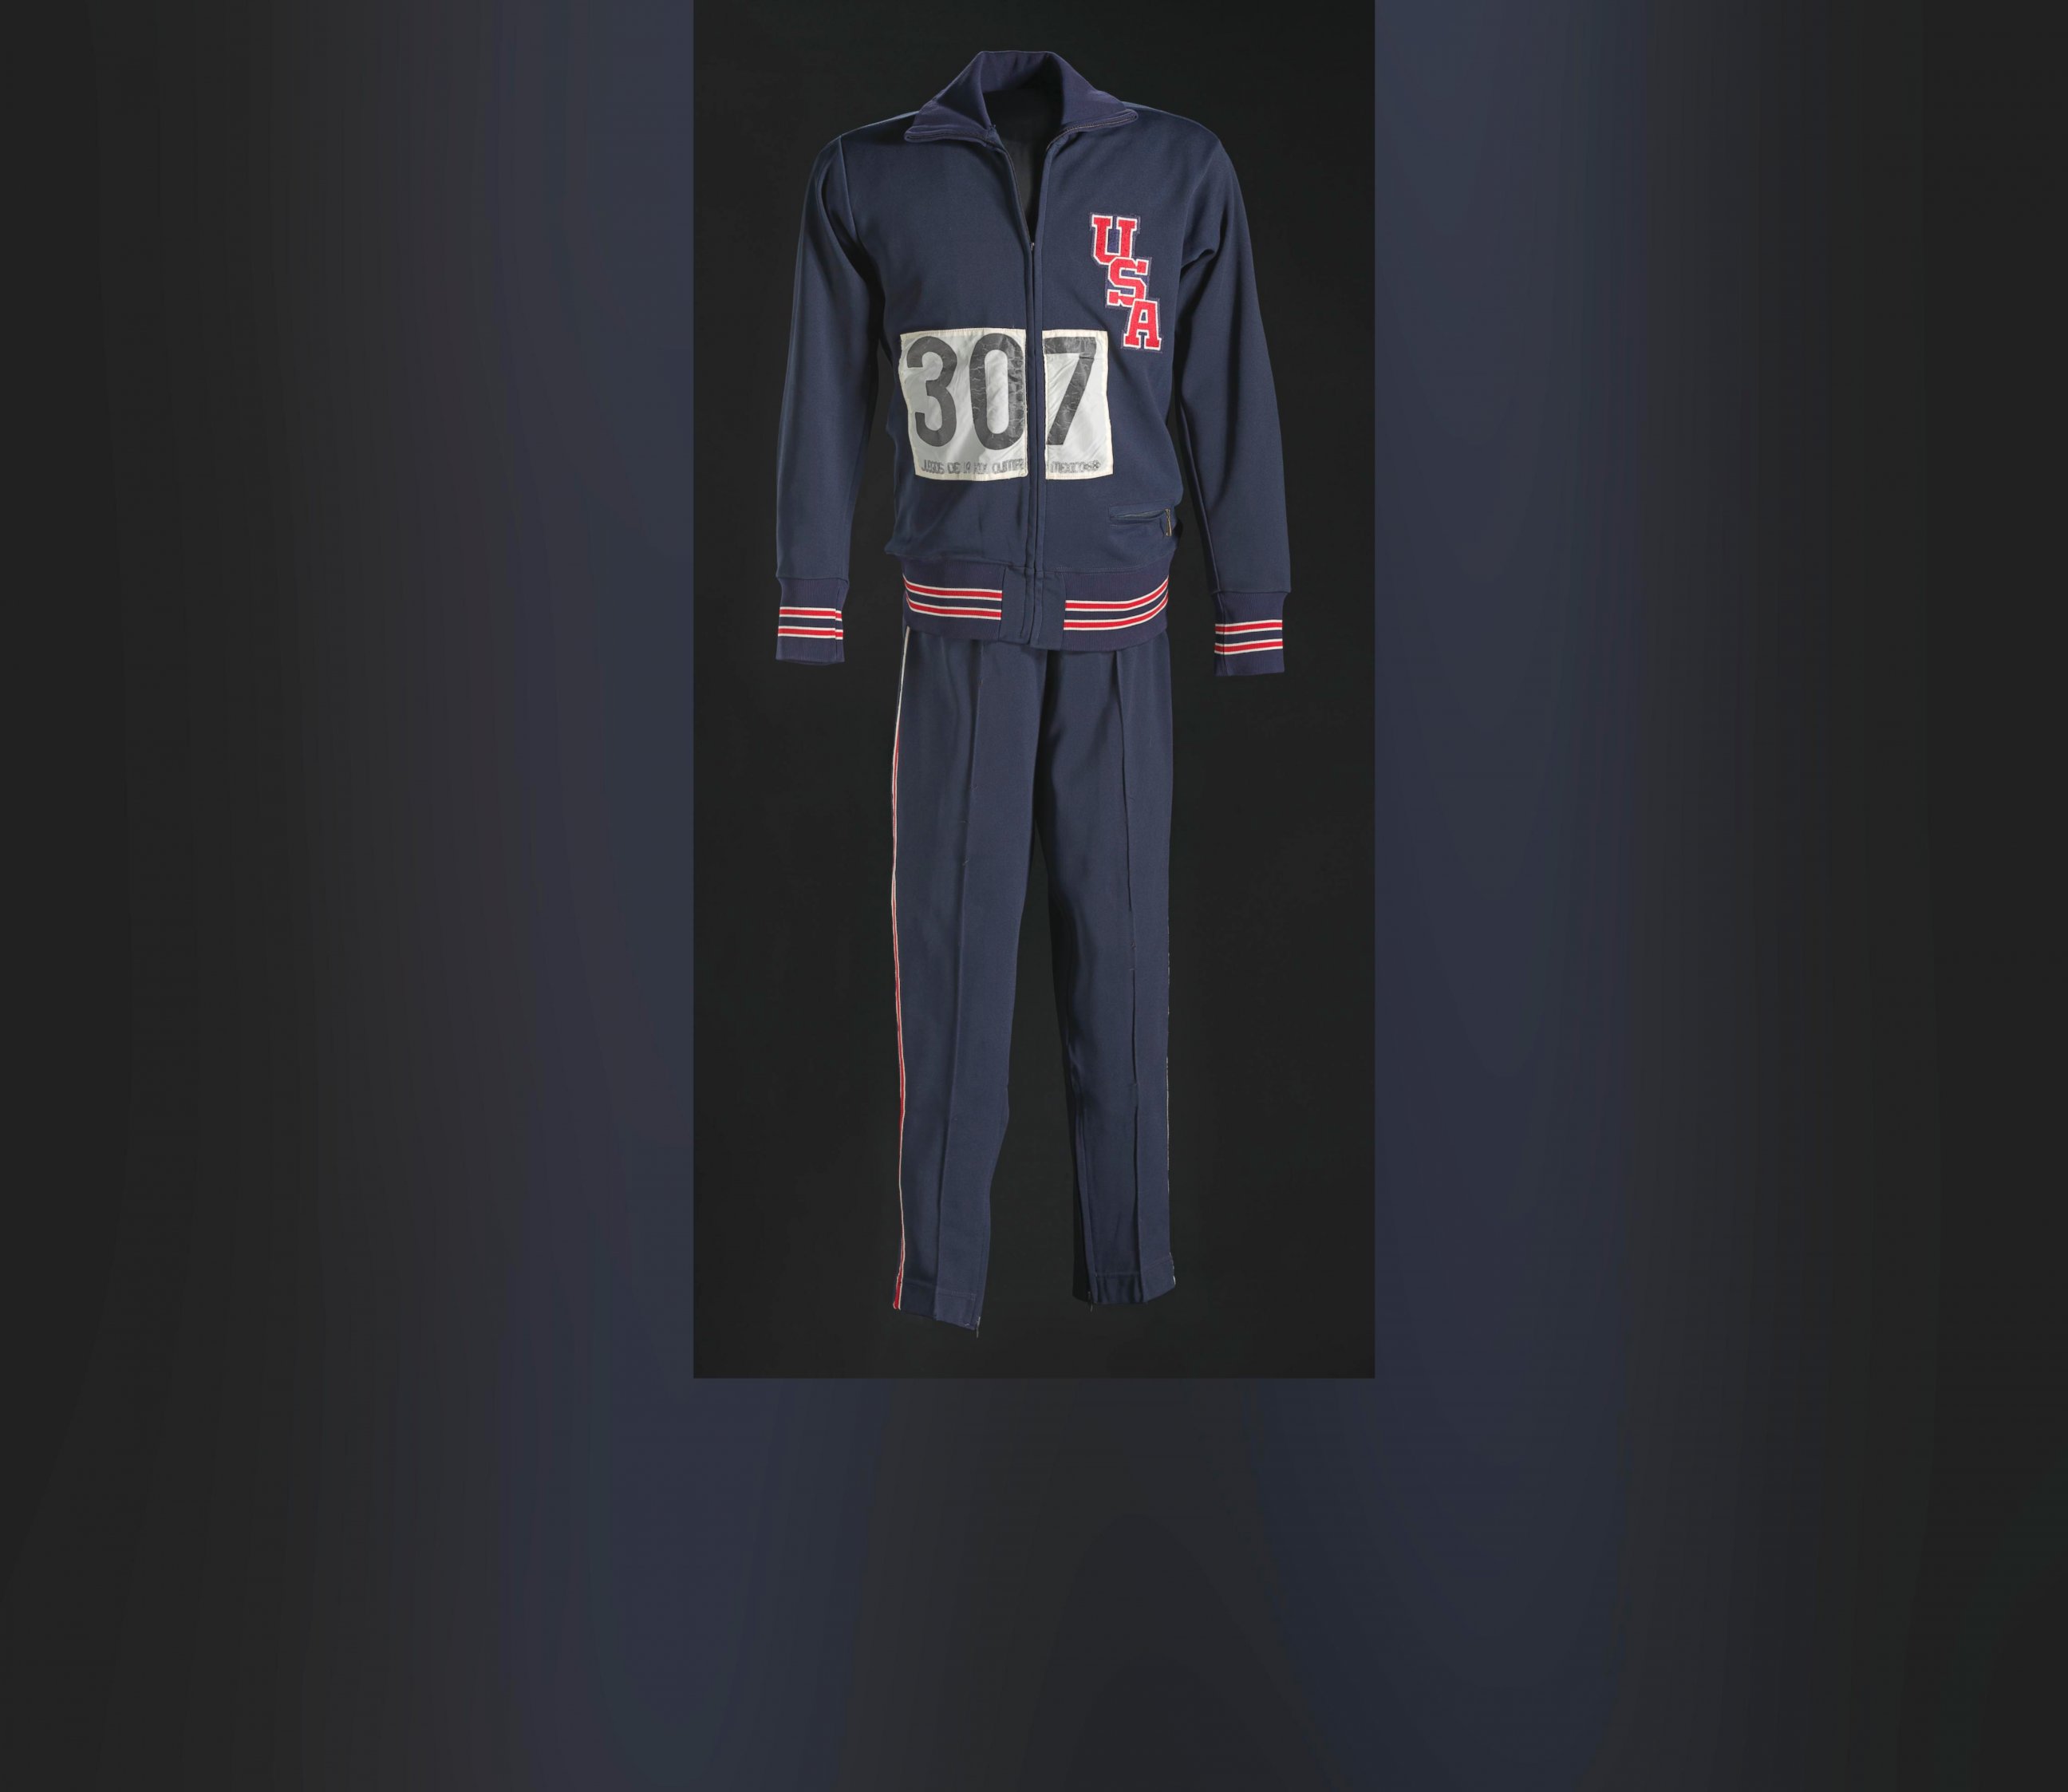 PHOTO: 1968 Olympic warm-up suit worn by Tommie Smith.